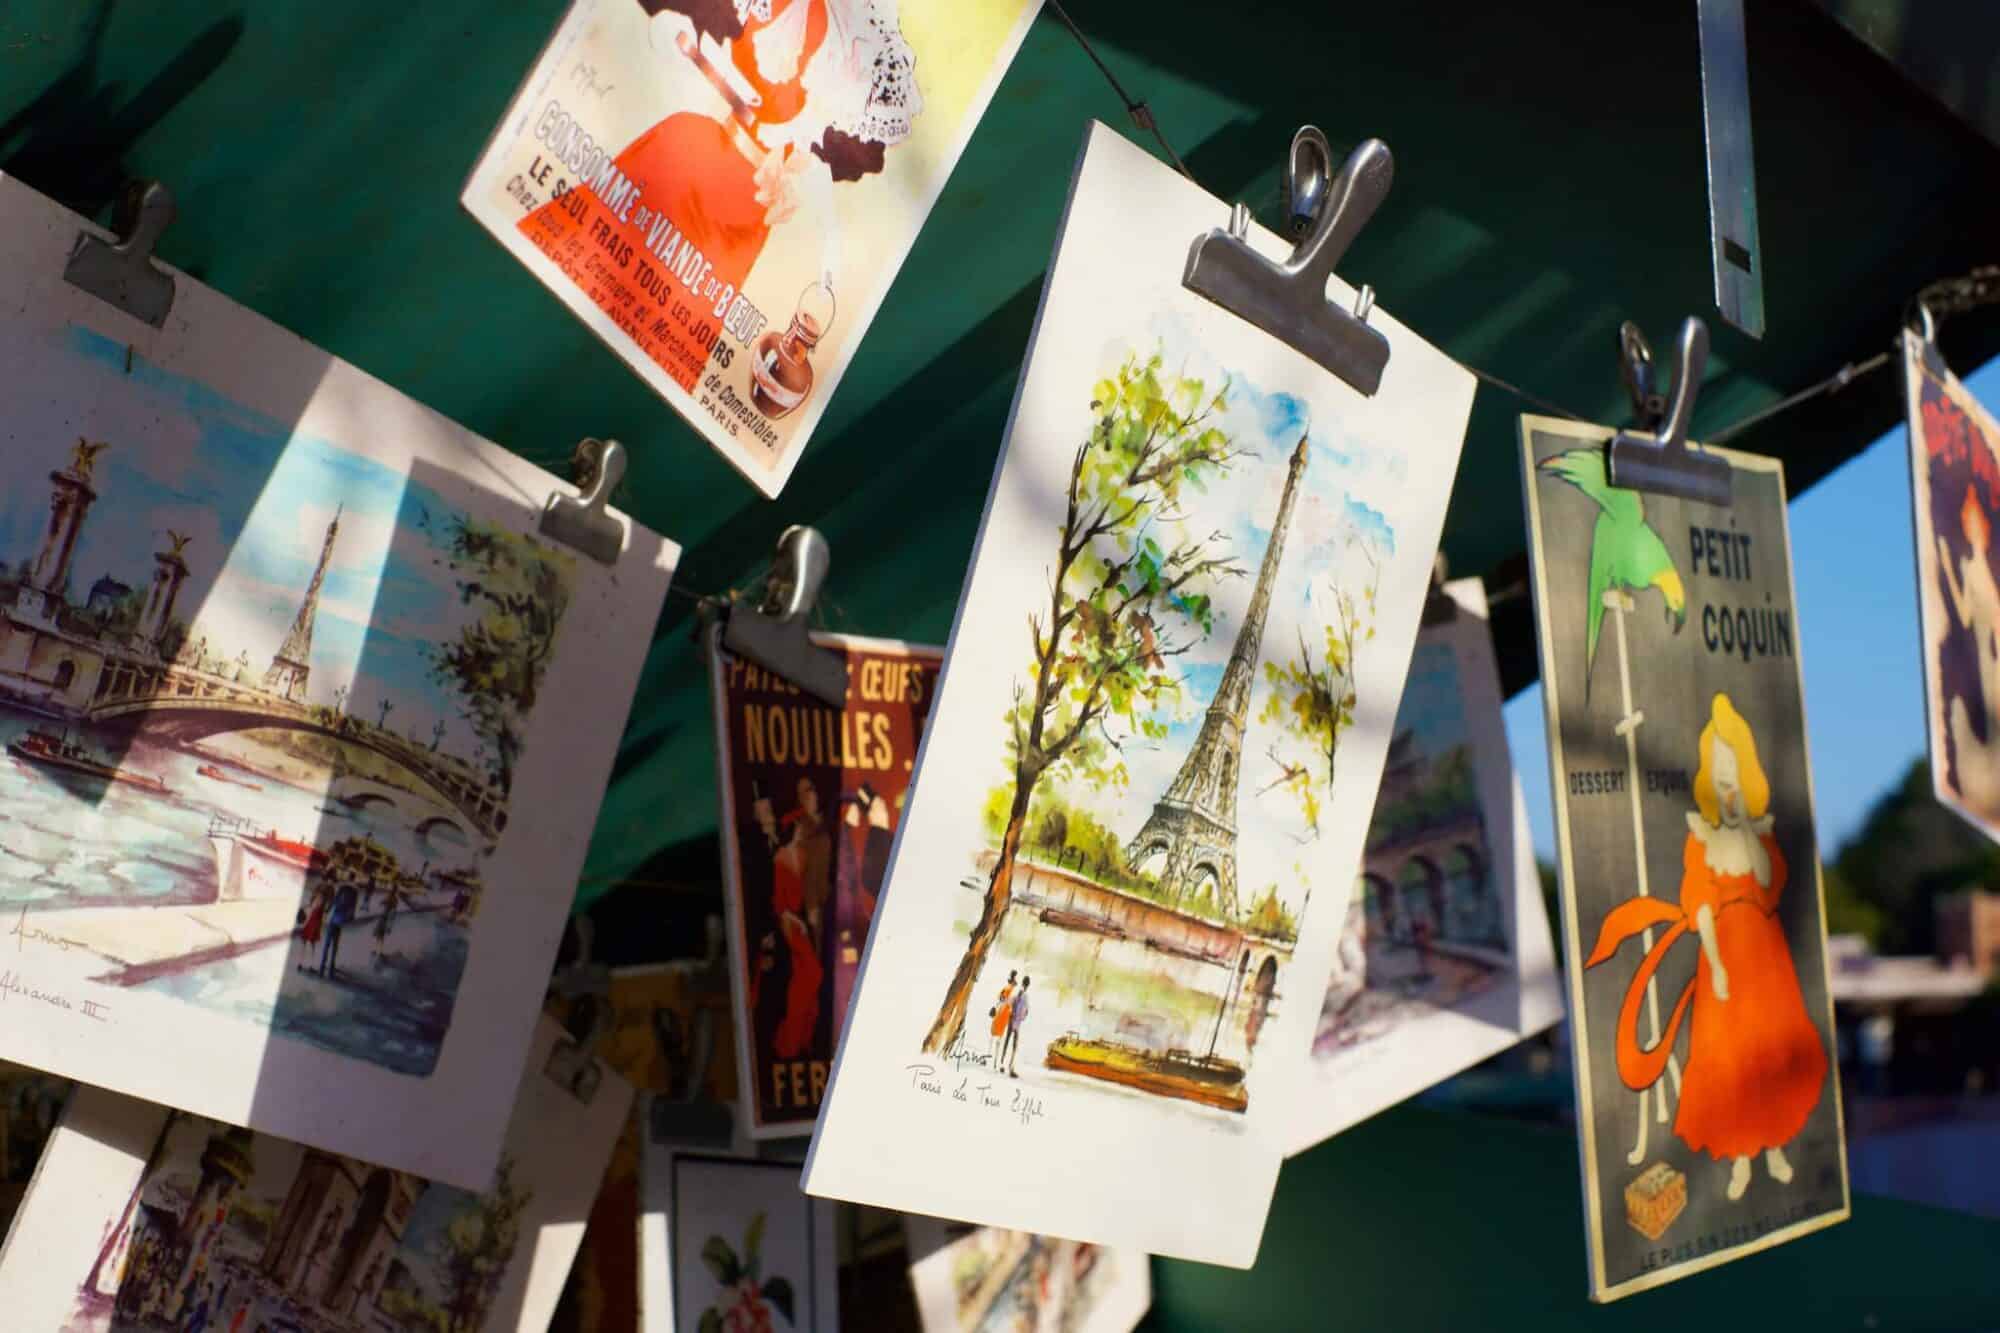 Beautiful hand-painted street art hangs from a vendor's booth along the Seine in Paris.